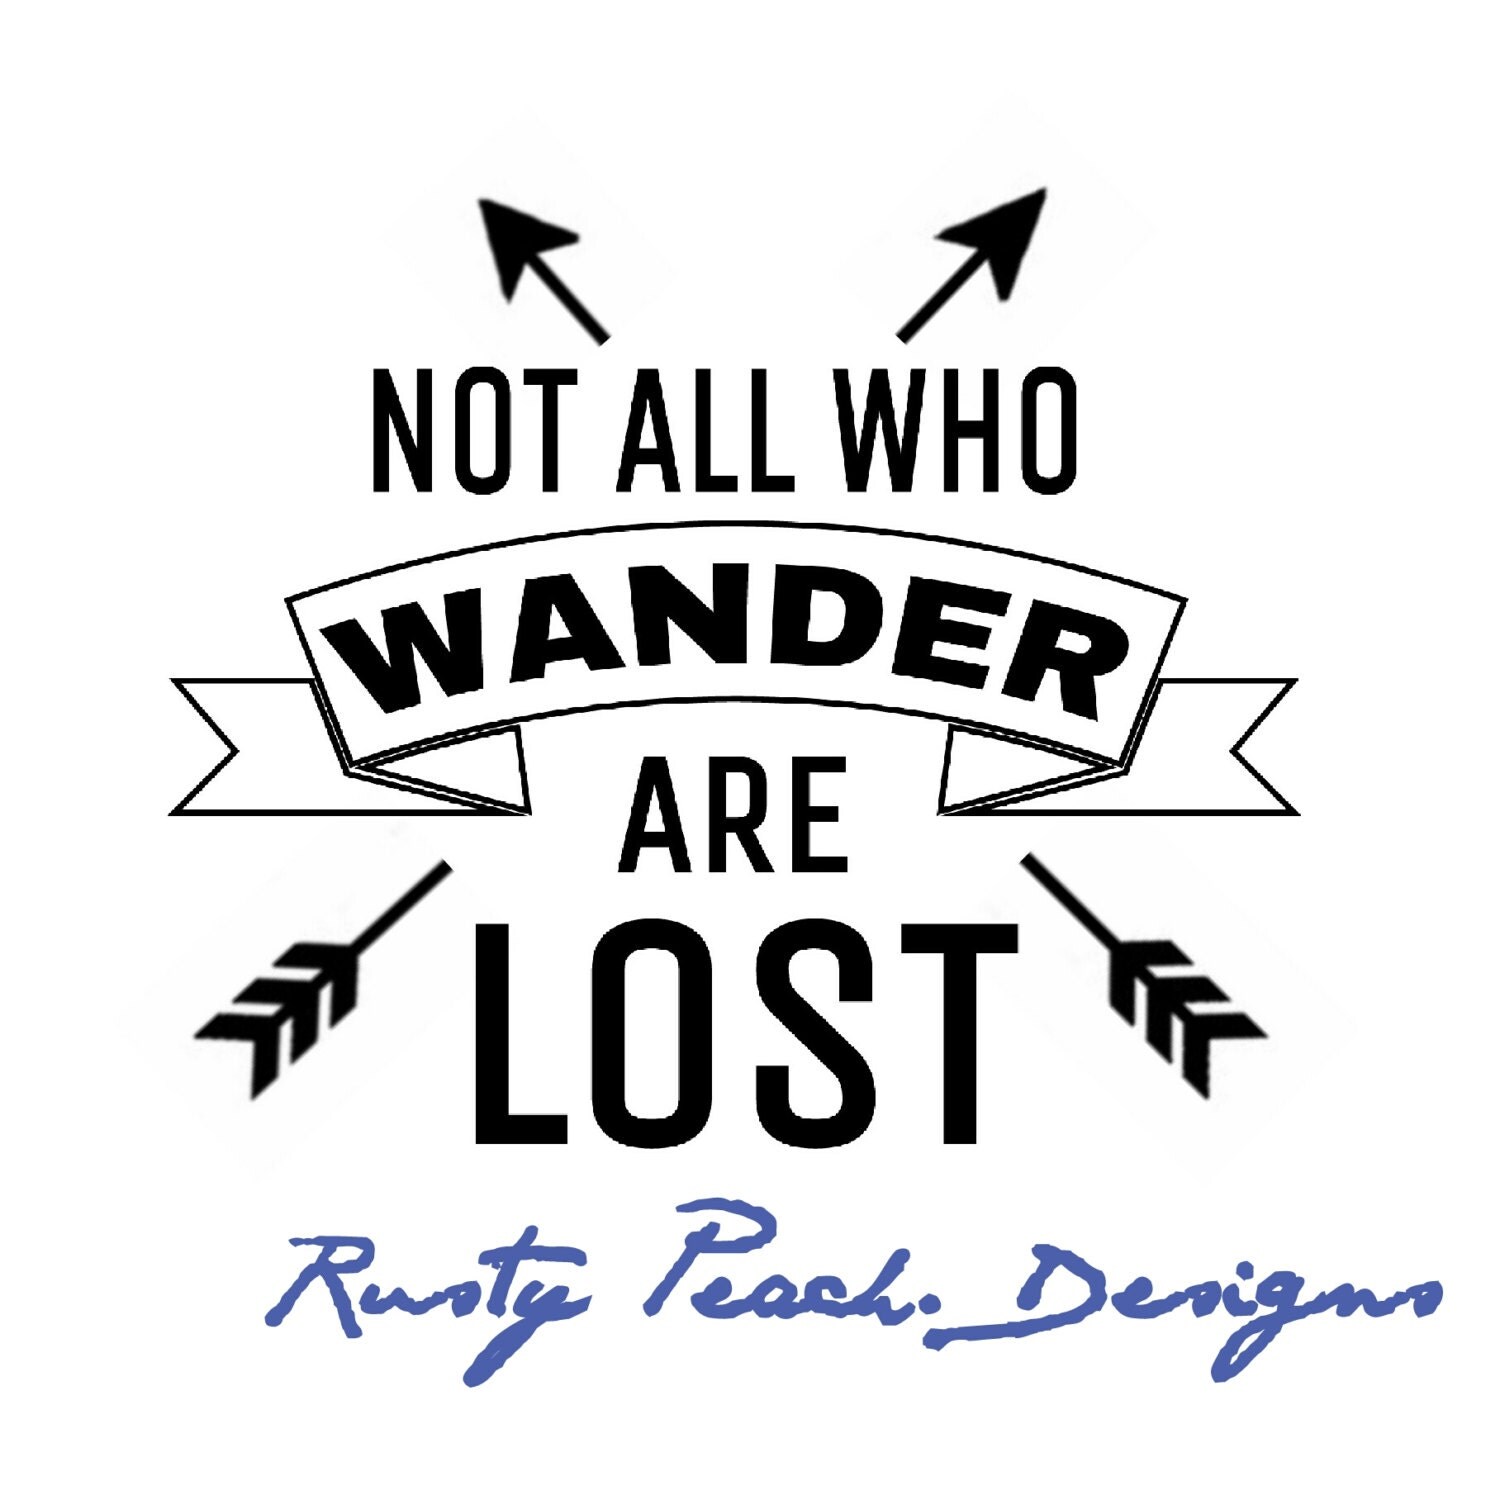 Not All Who Wander Are Lost Vinyl Decal Hiking Camping Your